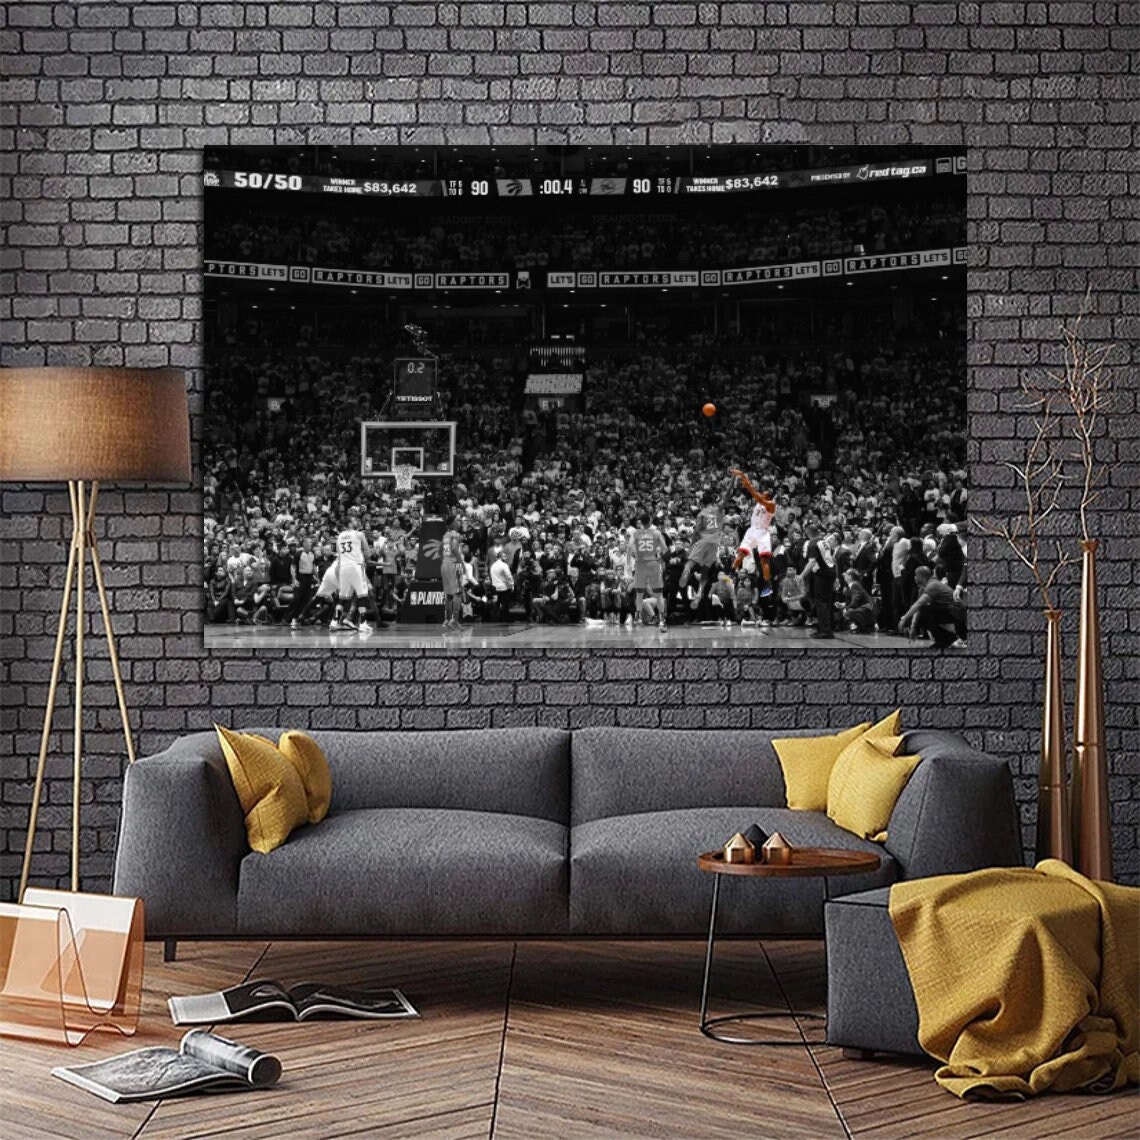 Chaoxin Toronto Raptors 2019 Finals Canvas Art Poster and Wall Art Picture Print Modern Family Bedroom Decor Posters 08x12inch 20x30cm 